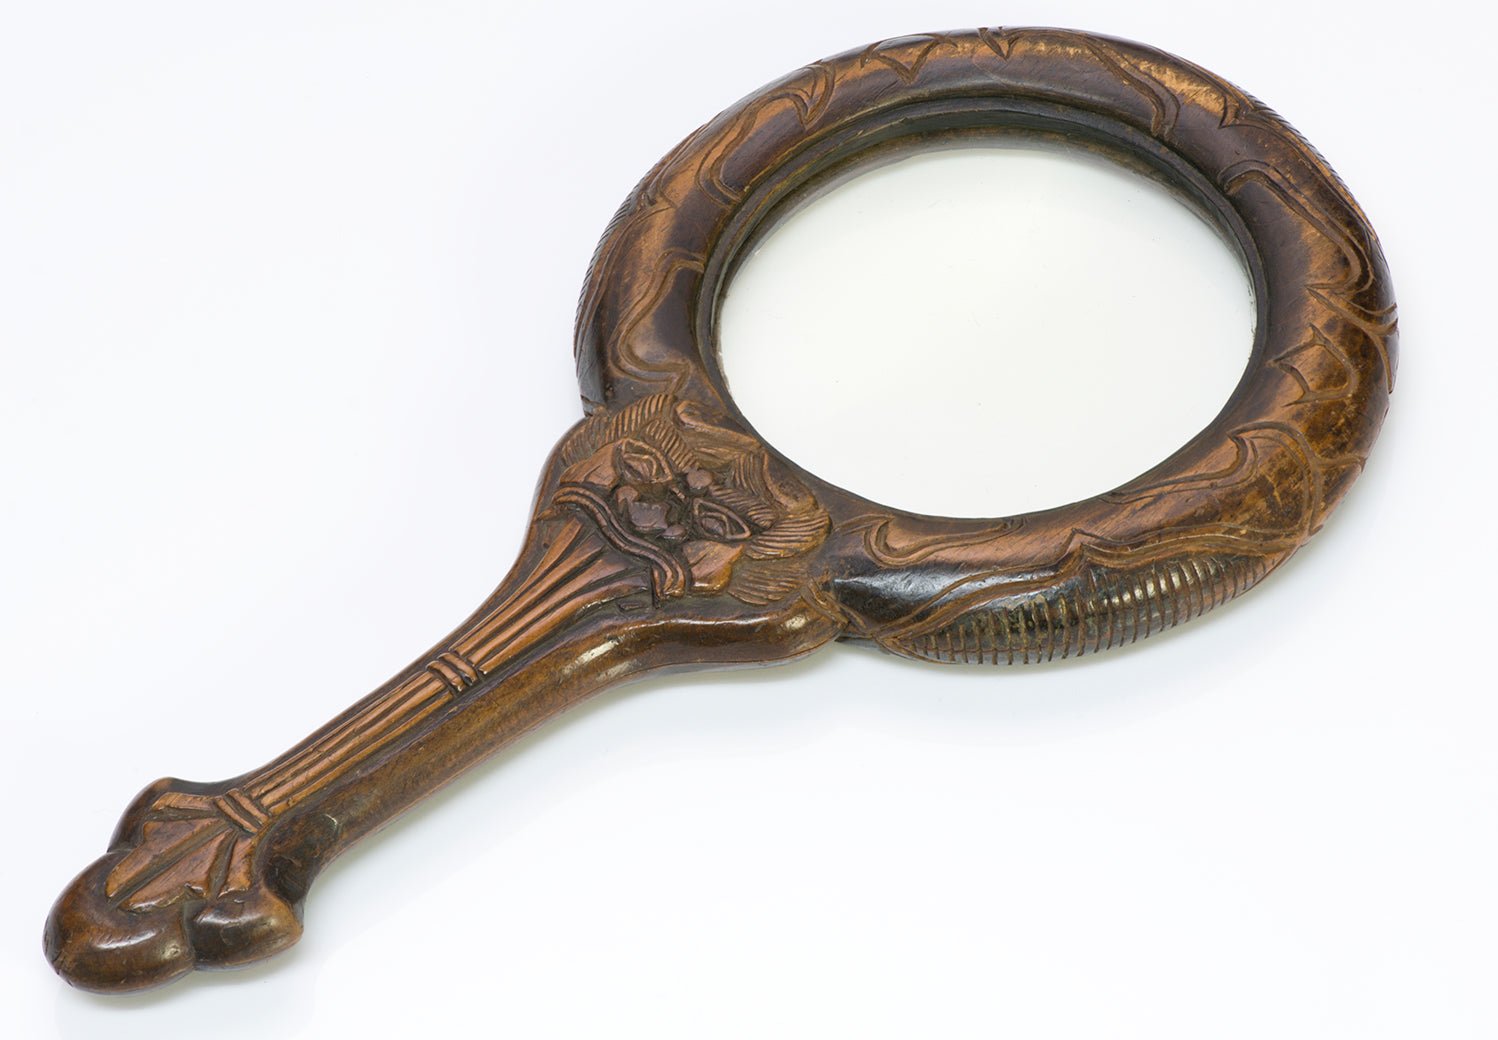 Antique Chinese Carved Wood Magnifier